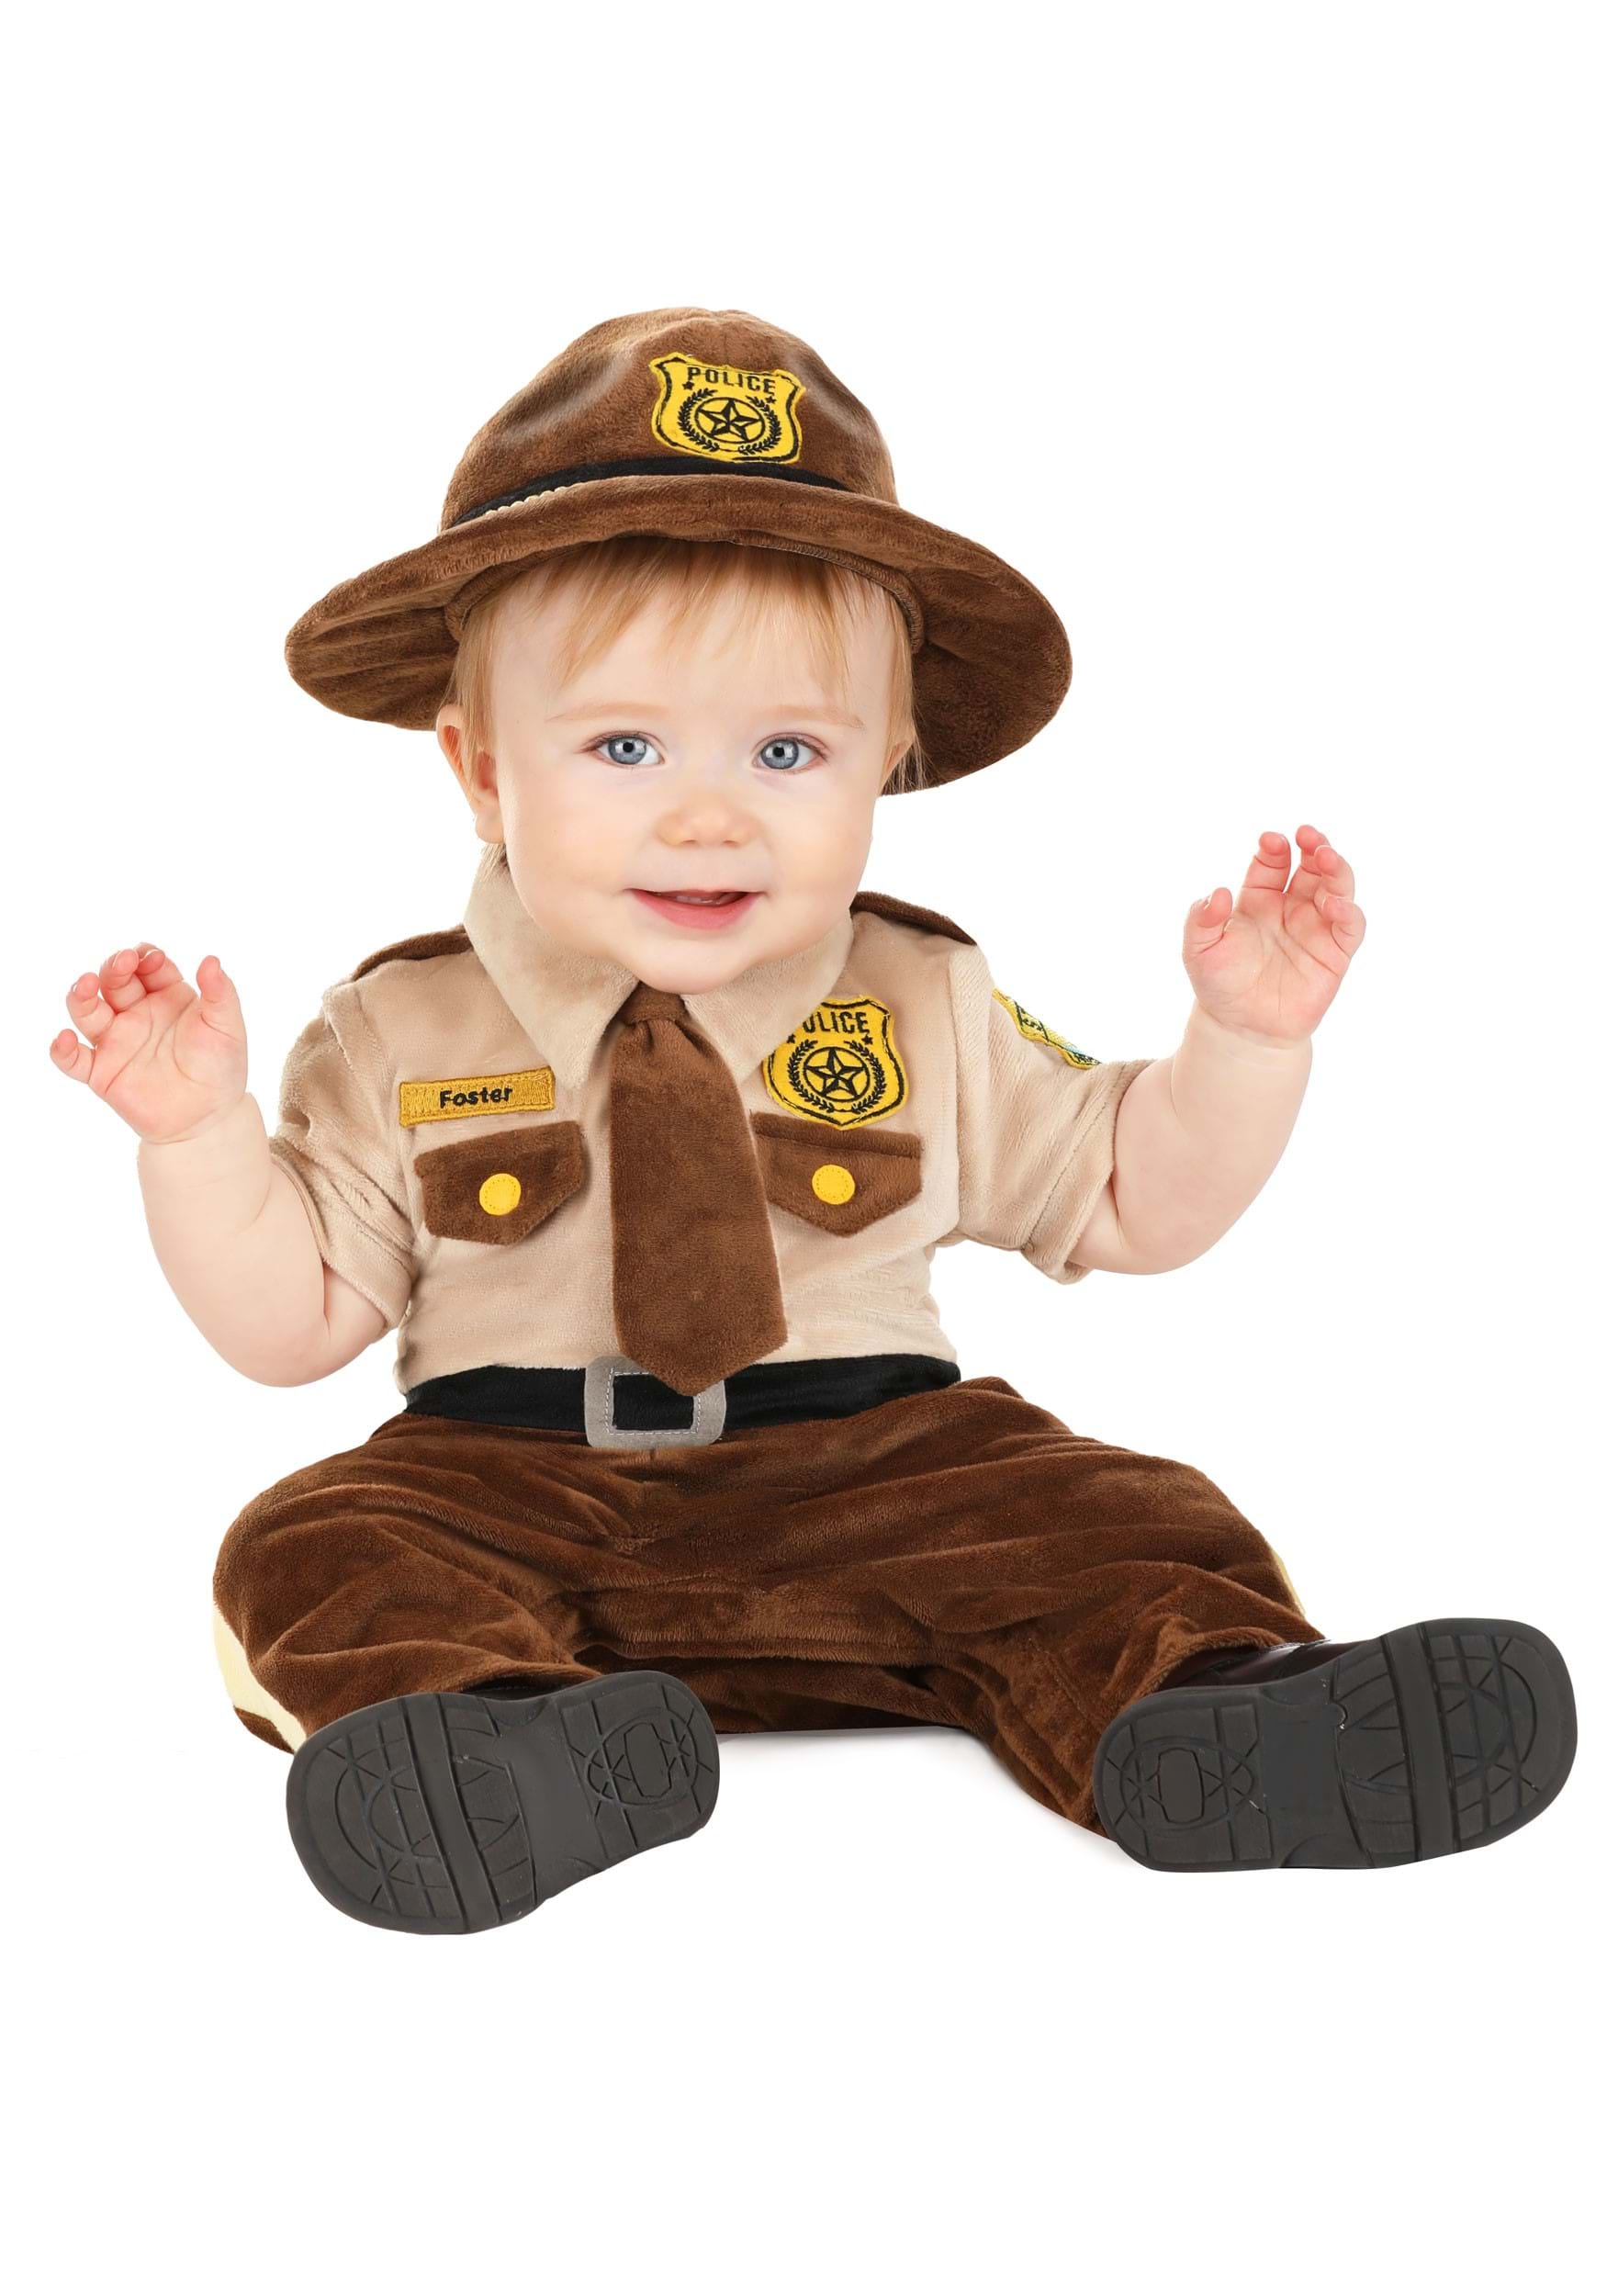 Photos - Fancy Dress FUN Costumes Super Troopers Costume for Infants Brown/Orange FUN4046IN